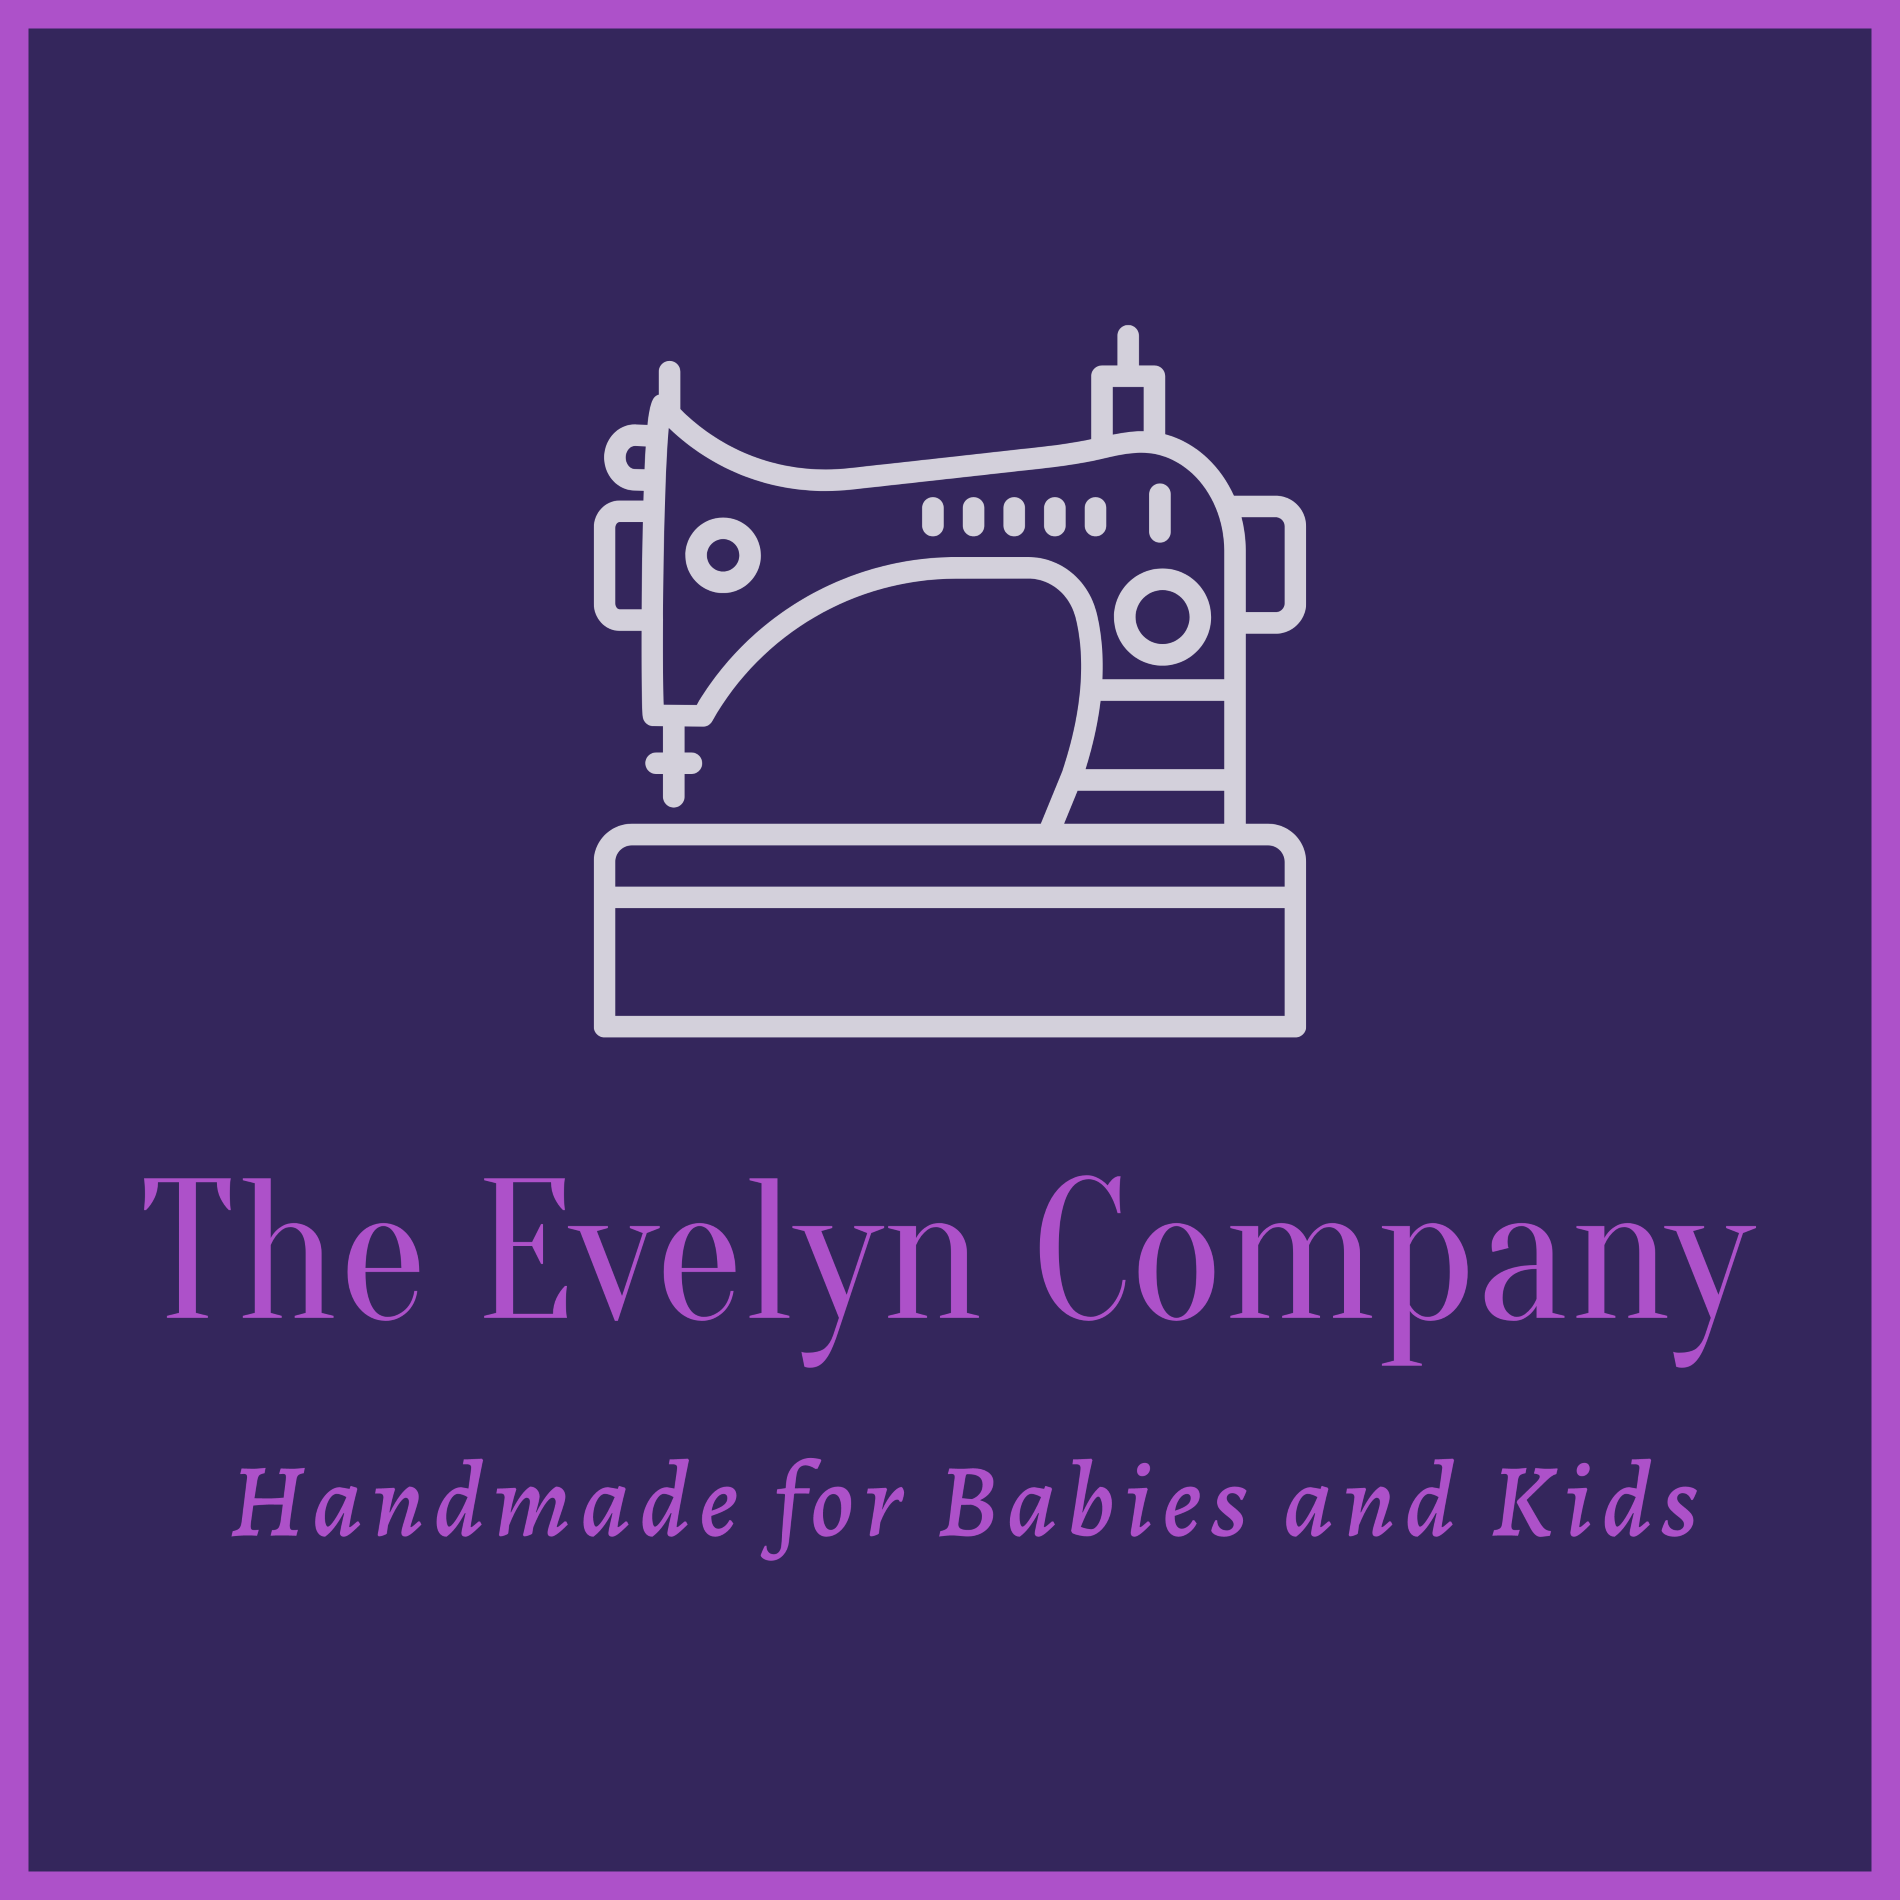 The Evelyn Company